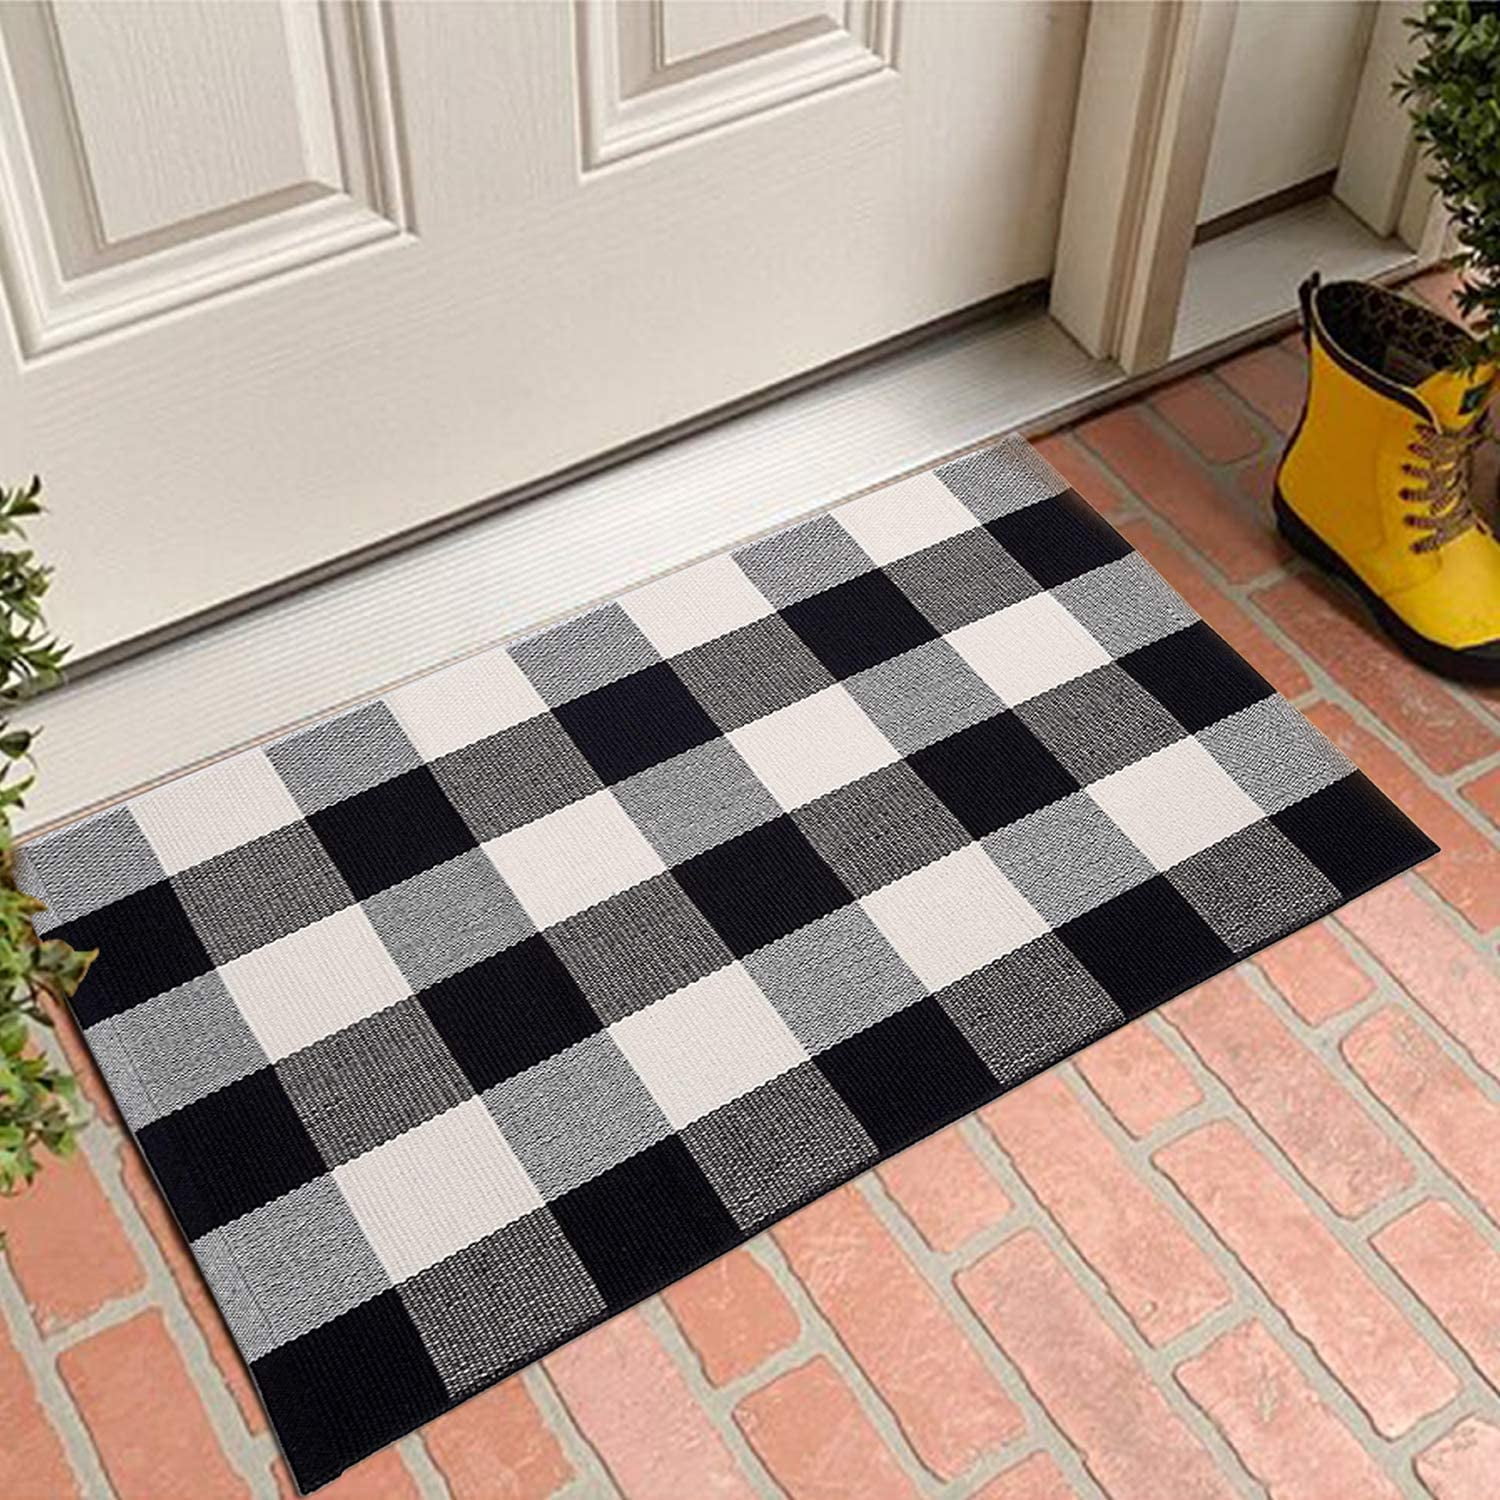 Fasmov Black and Red Plaid Rug 100% Cotton Porch Rugs Hand-Woven Buffalo Checkered Doormat 23 x 51 